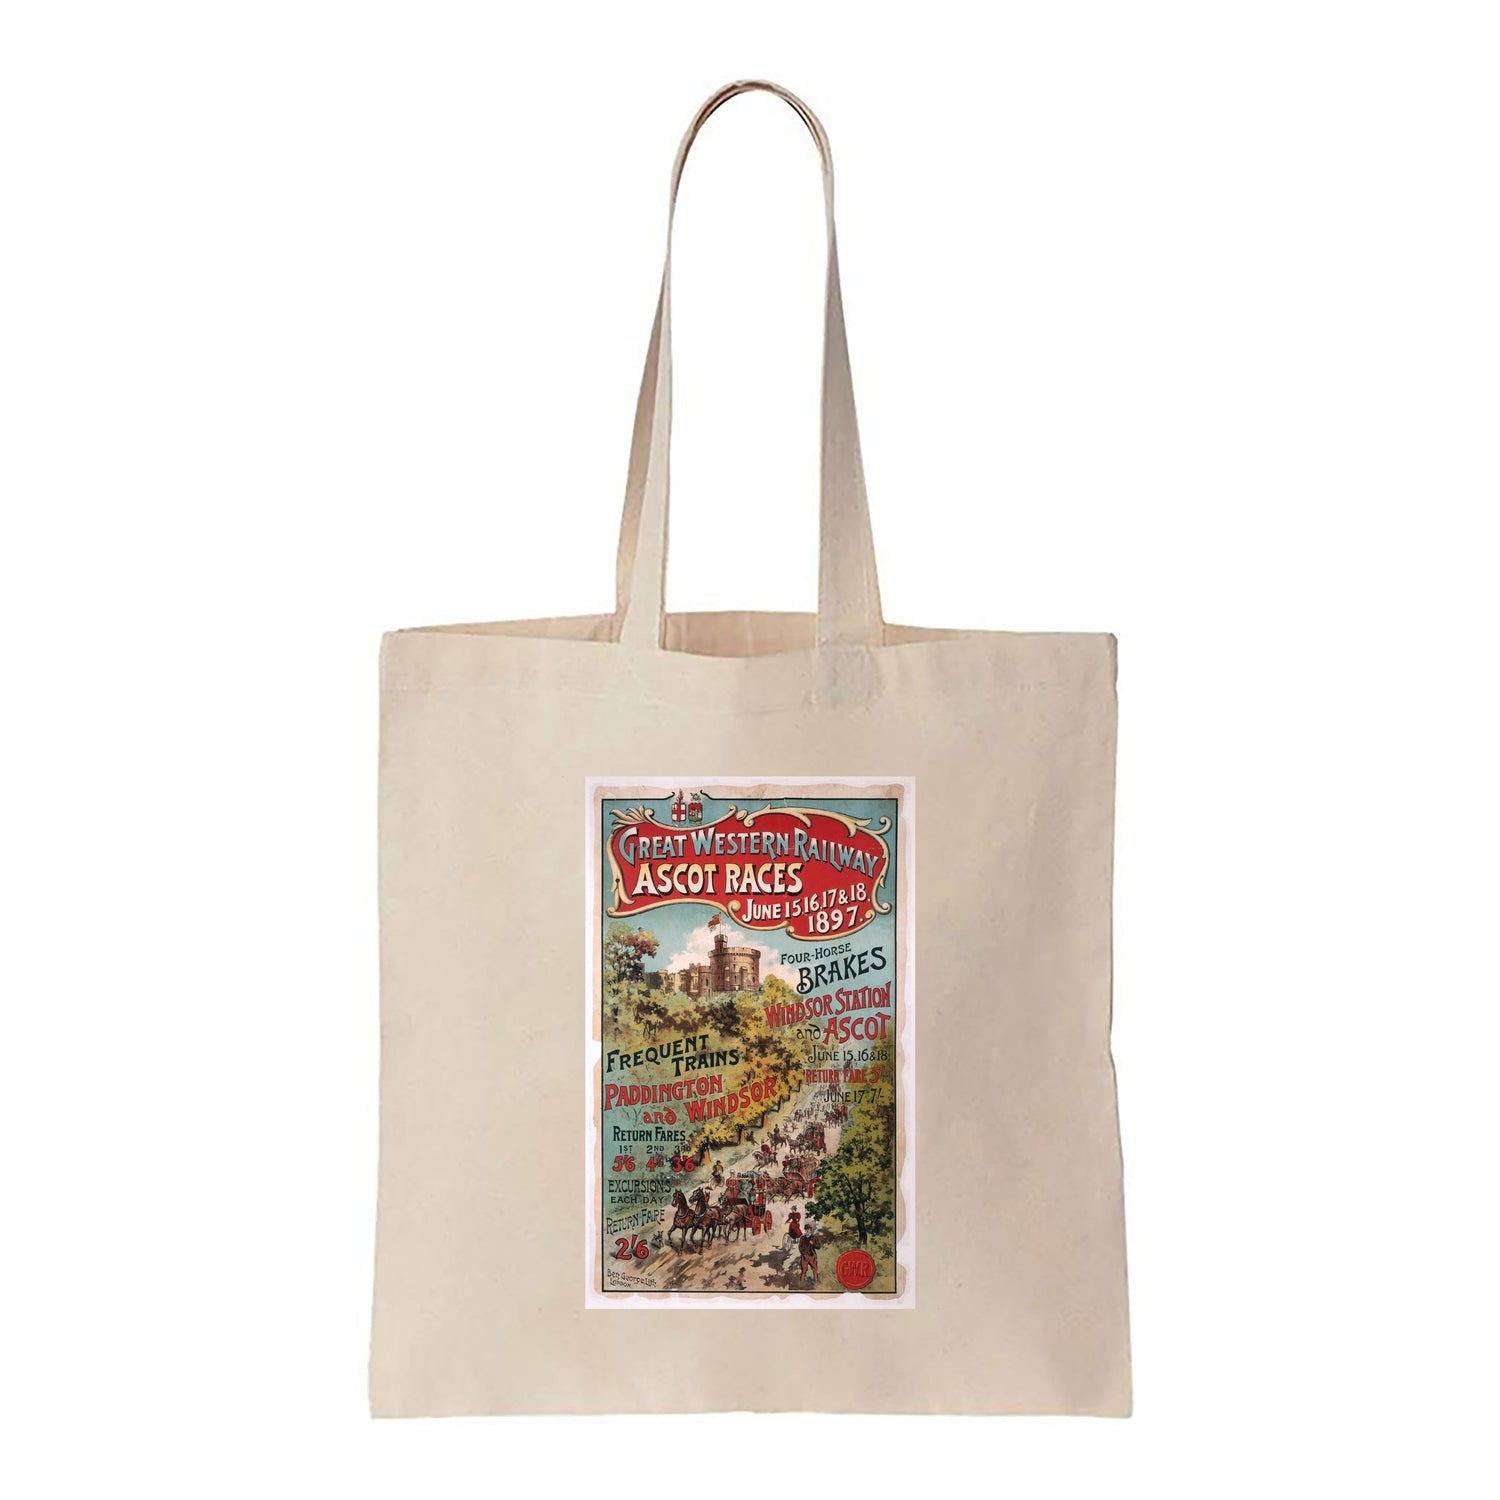 Ascot Races - 15, 16, 17 and 18 June 1897 - Canvas Tote Bag